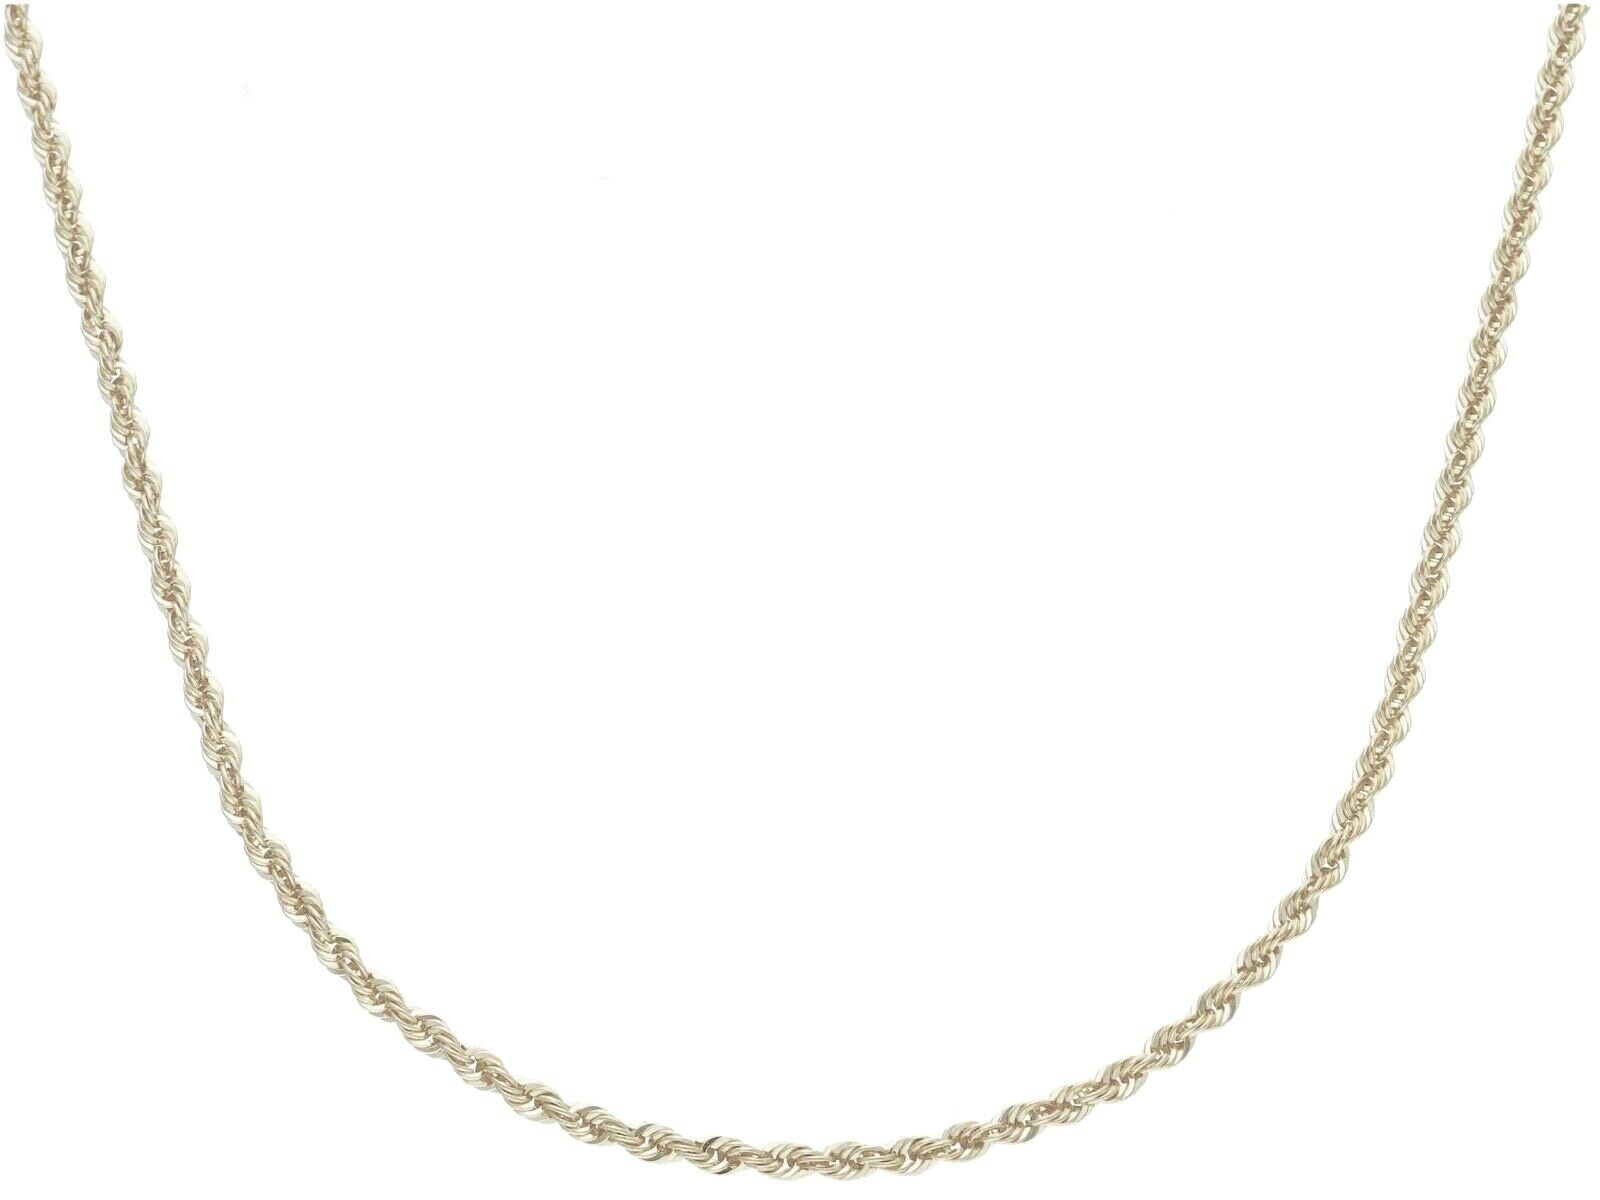 SOLID 18K WHITE GOLD CHAIN NECKLACE 1.5mm ROPE BRAIDED 40cm 16